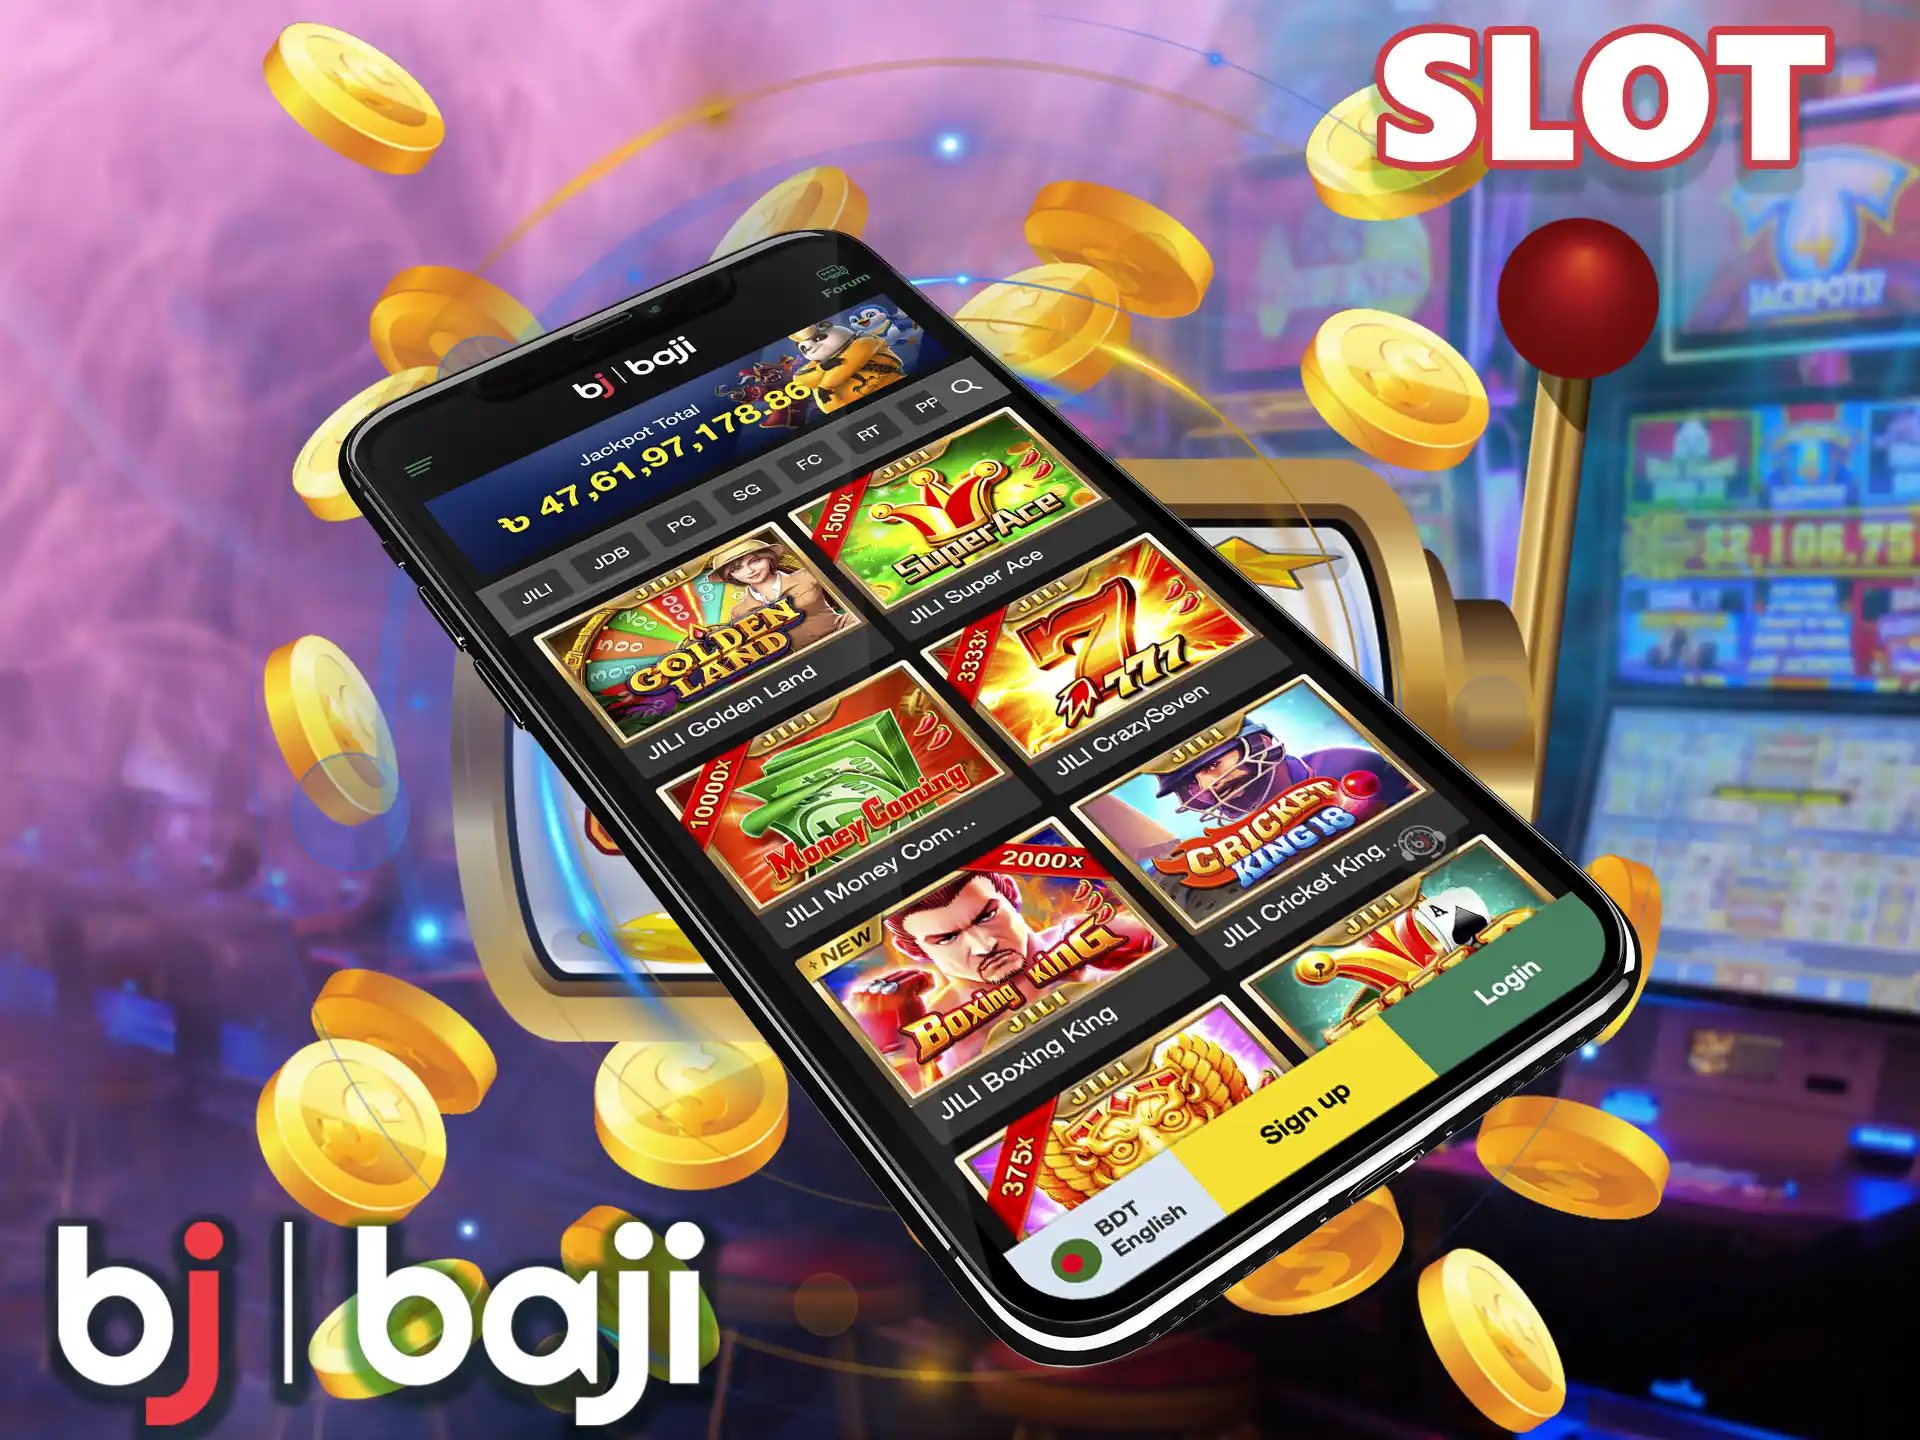 This type of casino Baji app will help beginners quickly get the hang of as well as surprise advanced, there are only quality suppliers of games.